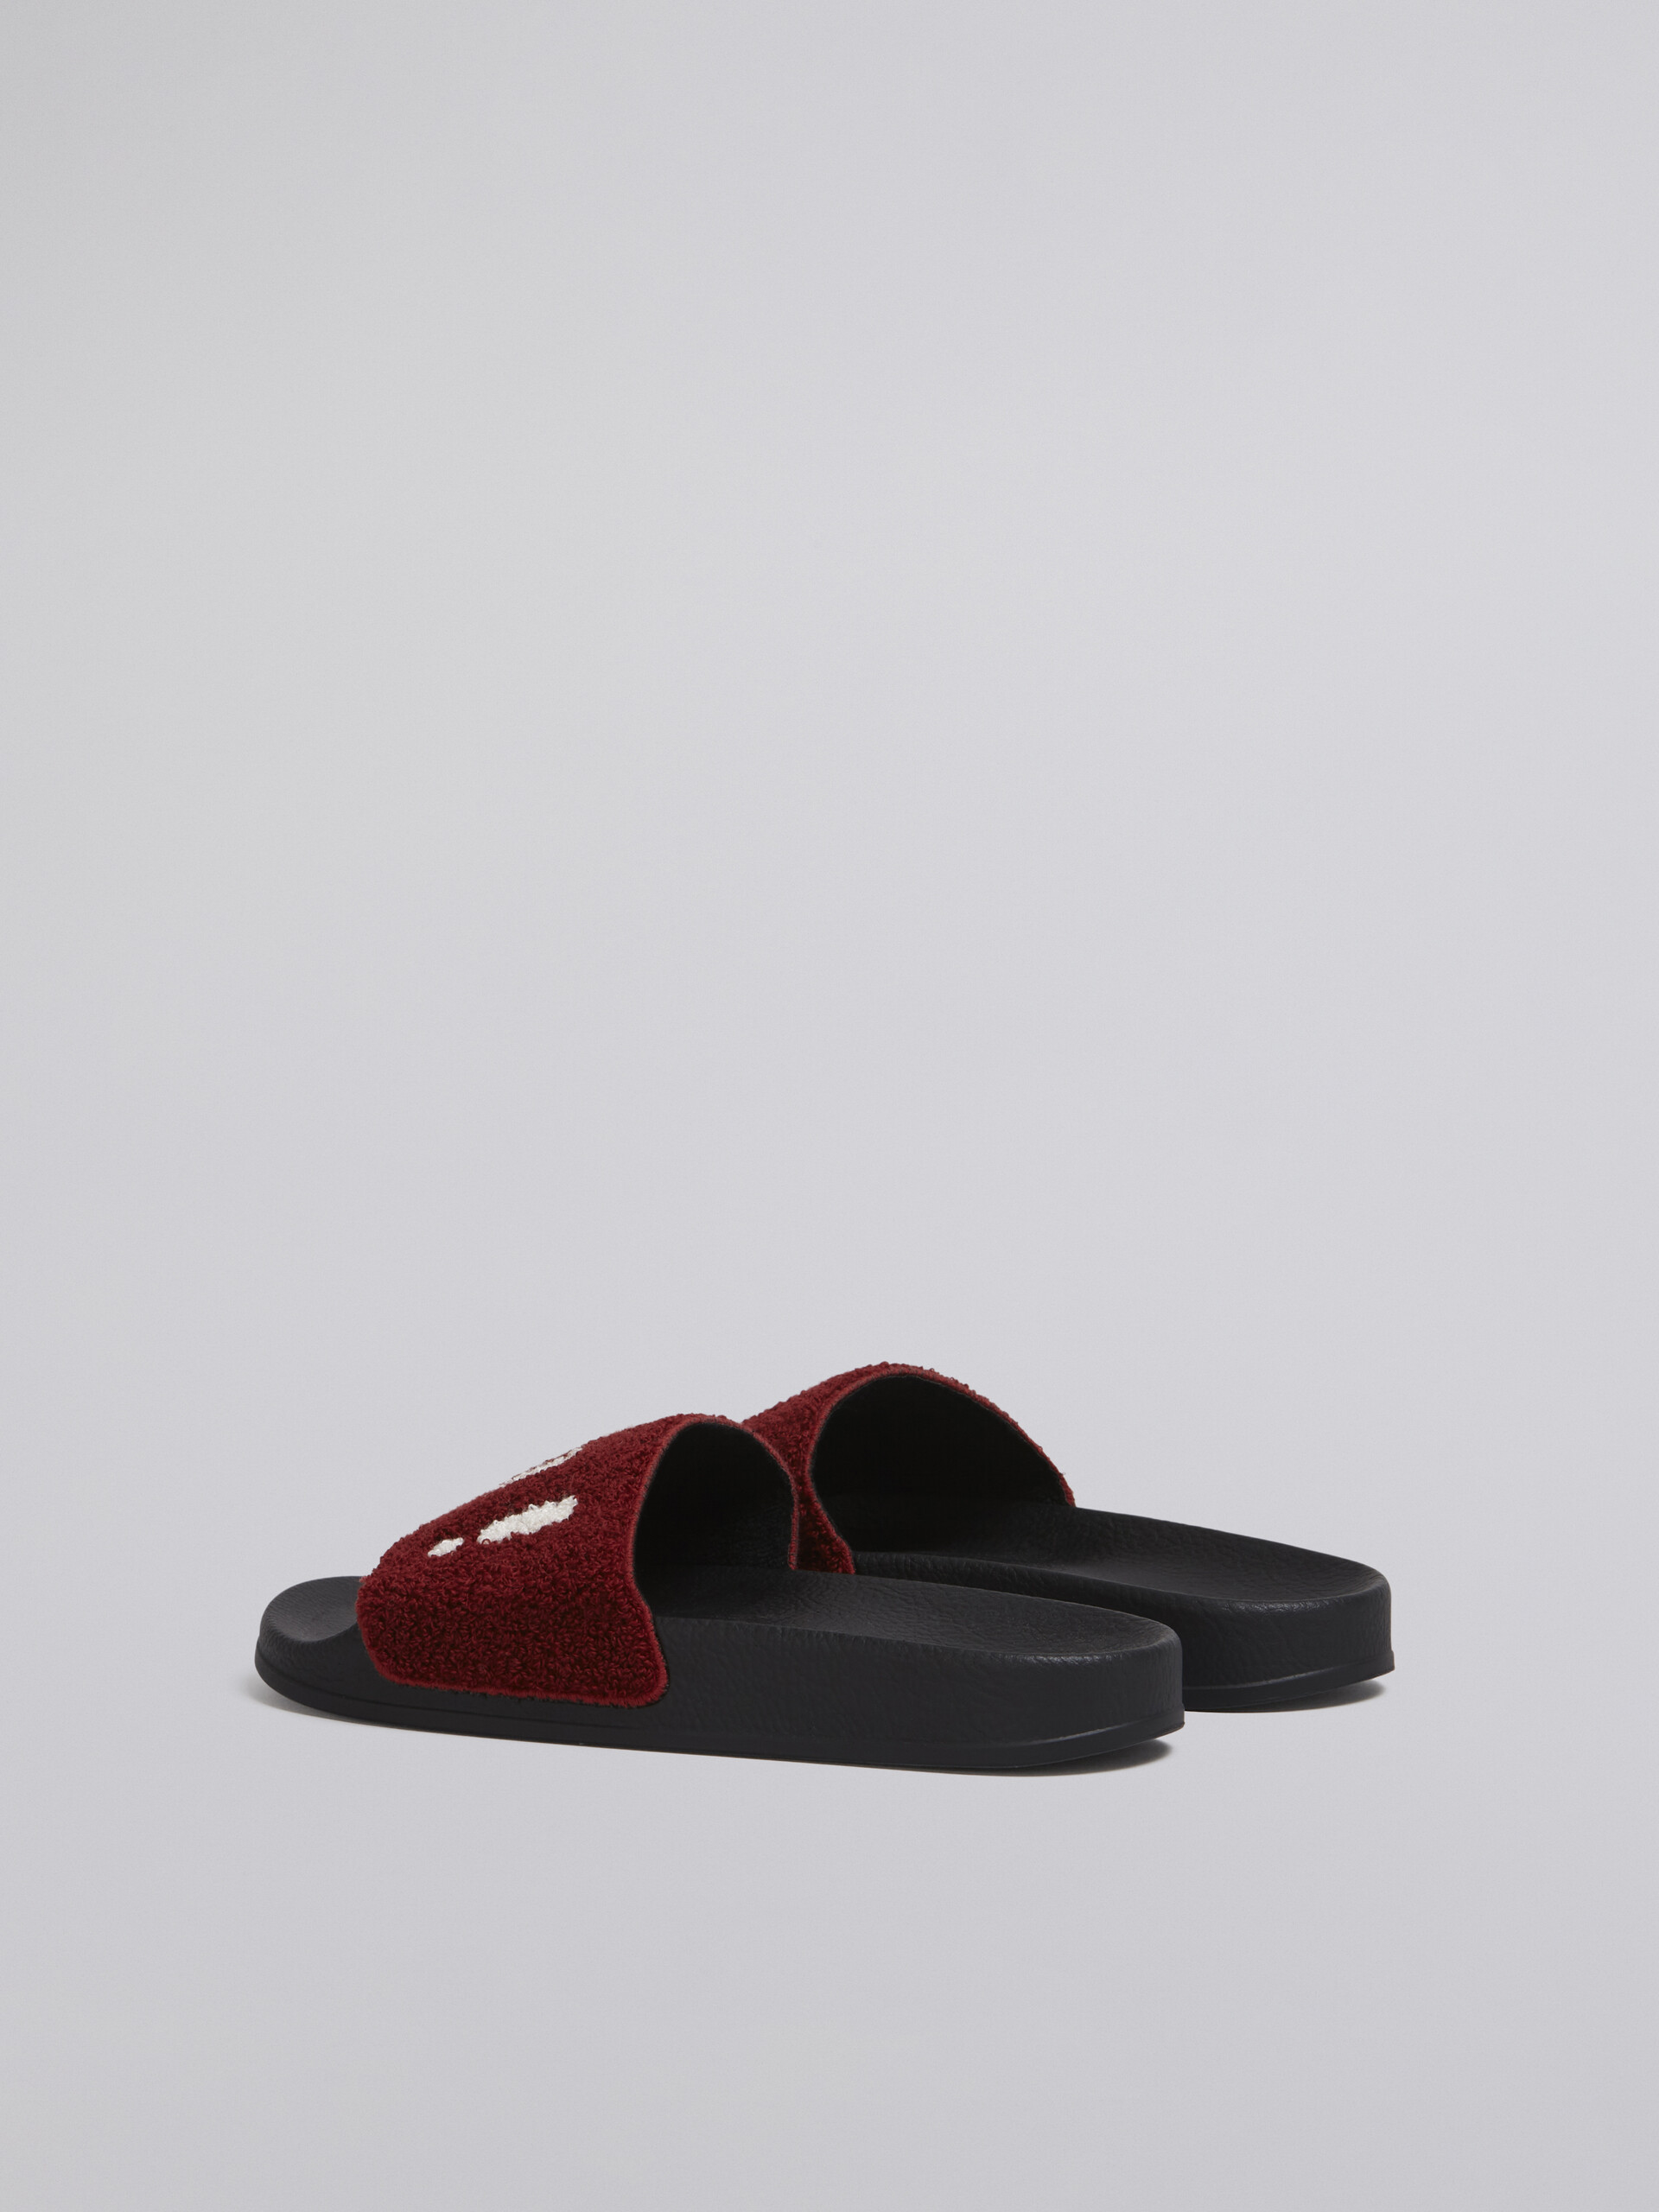 Rubber sandal with white and red terry-cloth band - Sandals - Image 3